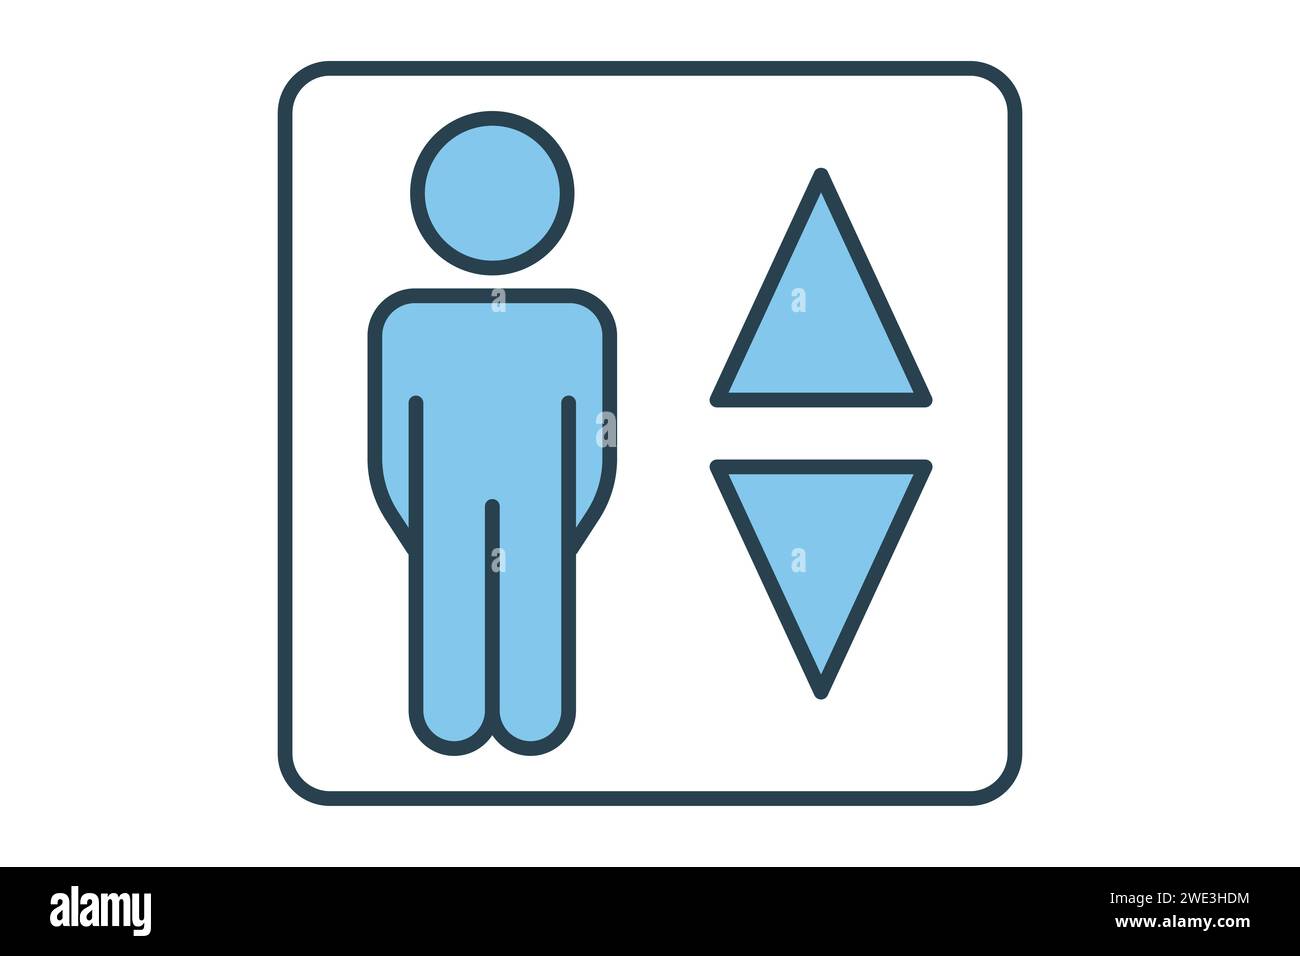 elevator icon. icon related to indoor navigation in public spaces. flat line icon style. element illustration Stock Vector